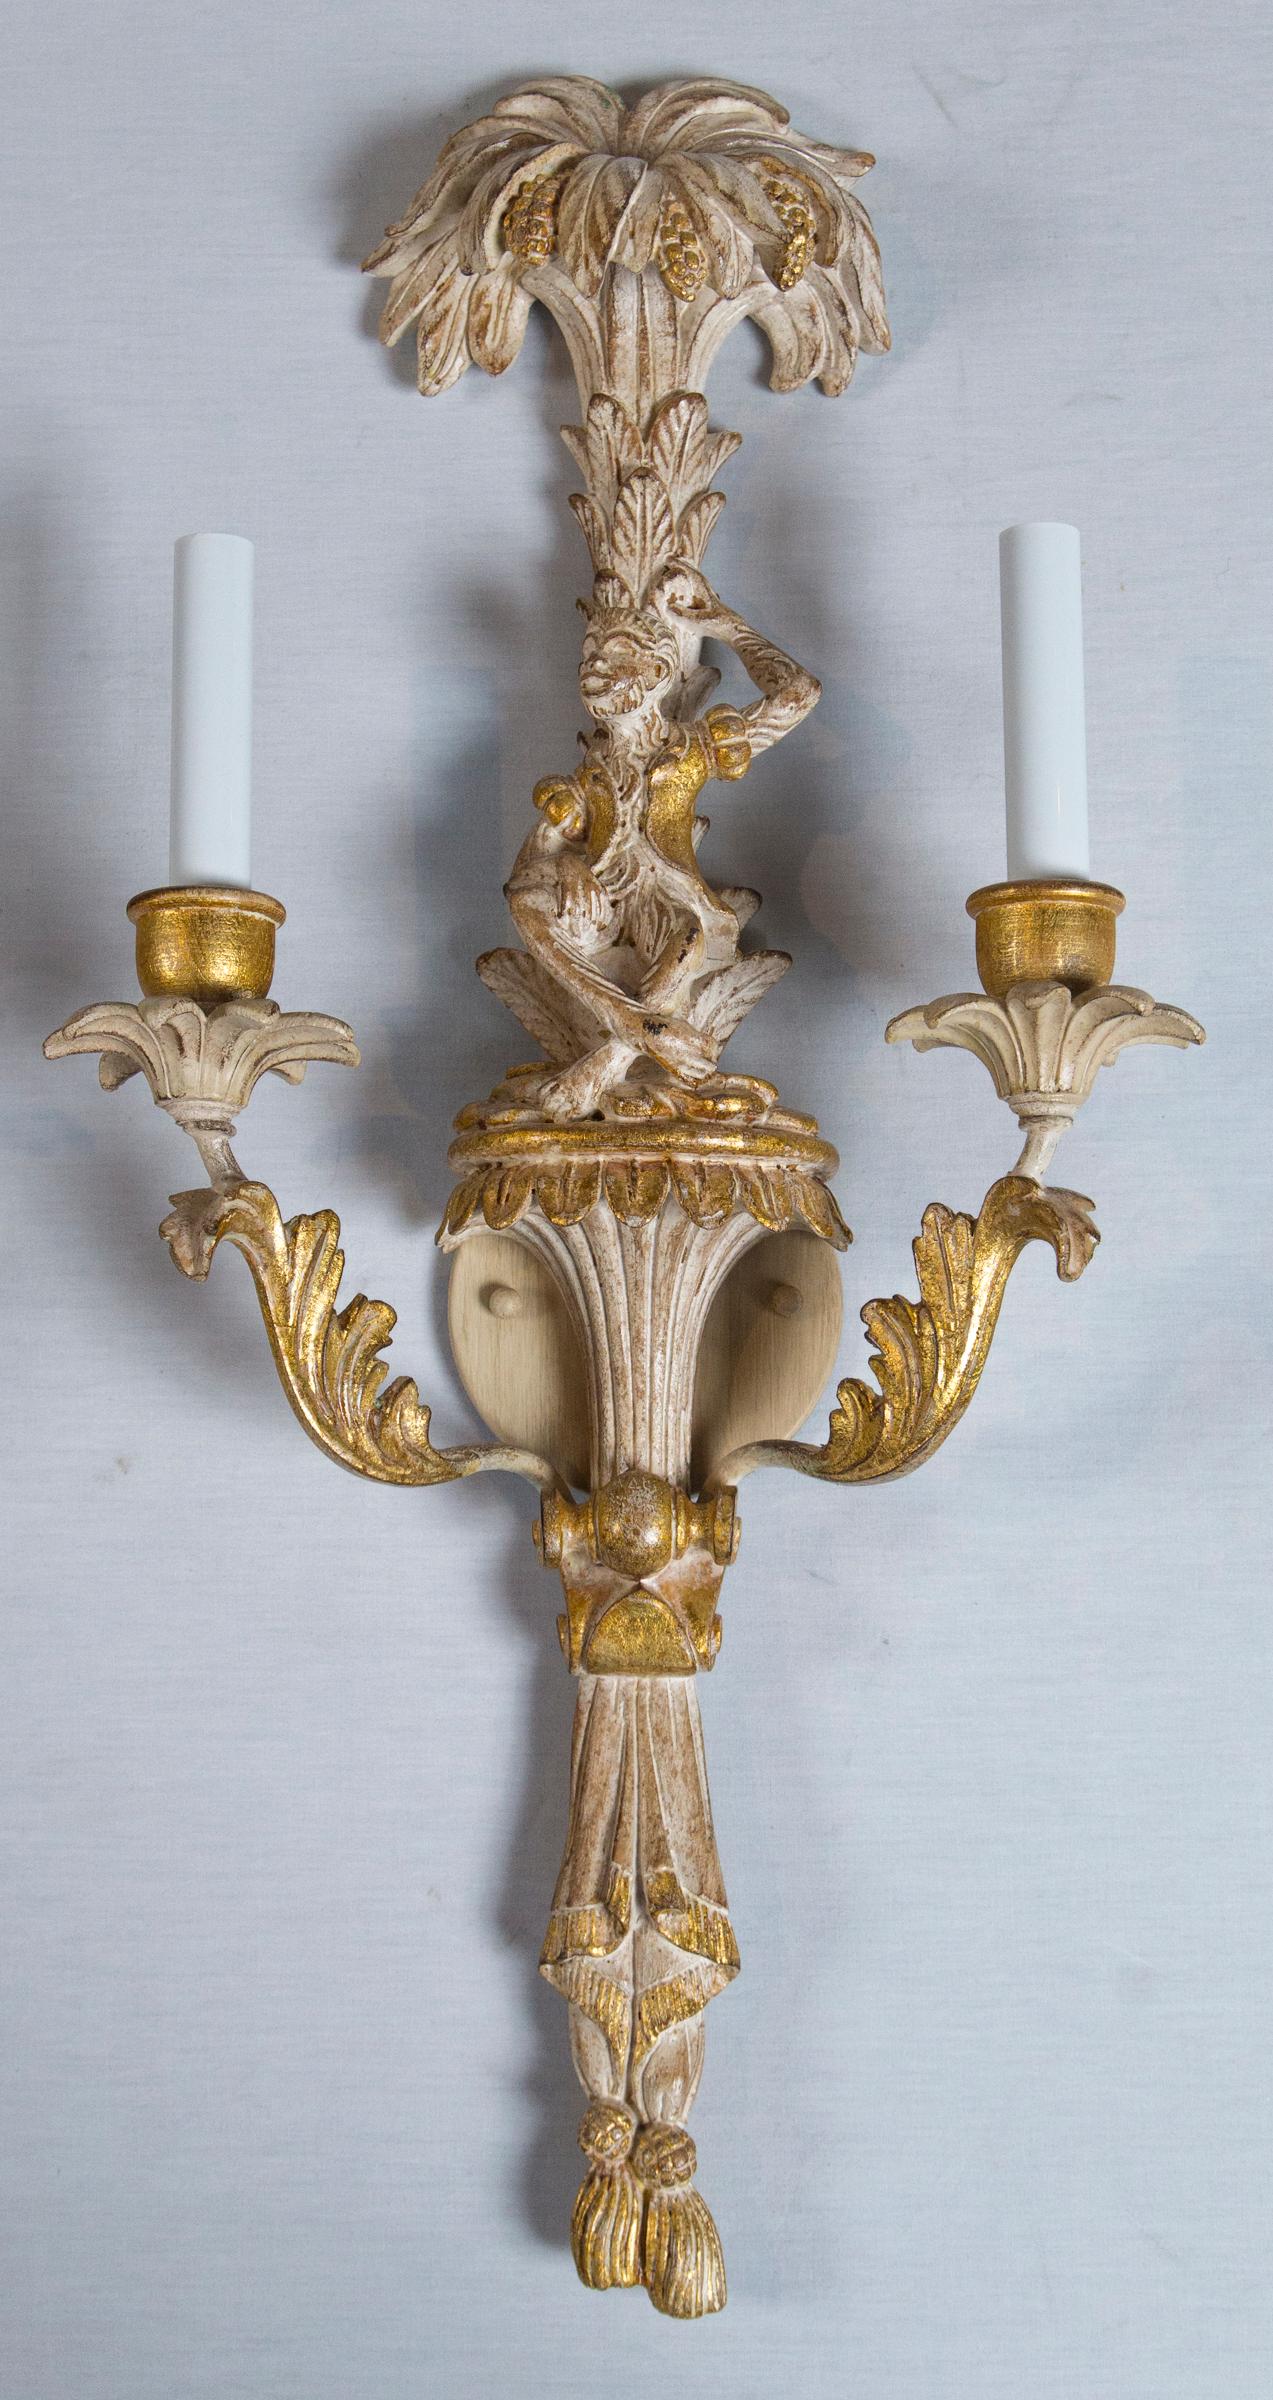 A whimsical pair of carved wood Italian chinoiserie sconces with monkeys and palms. These are new unused 1960s stock. The carved wood is lightly Cerused and gilded. Each sconce is wired for two chandelier bulbs.